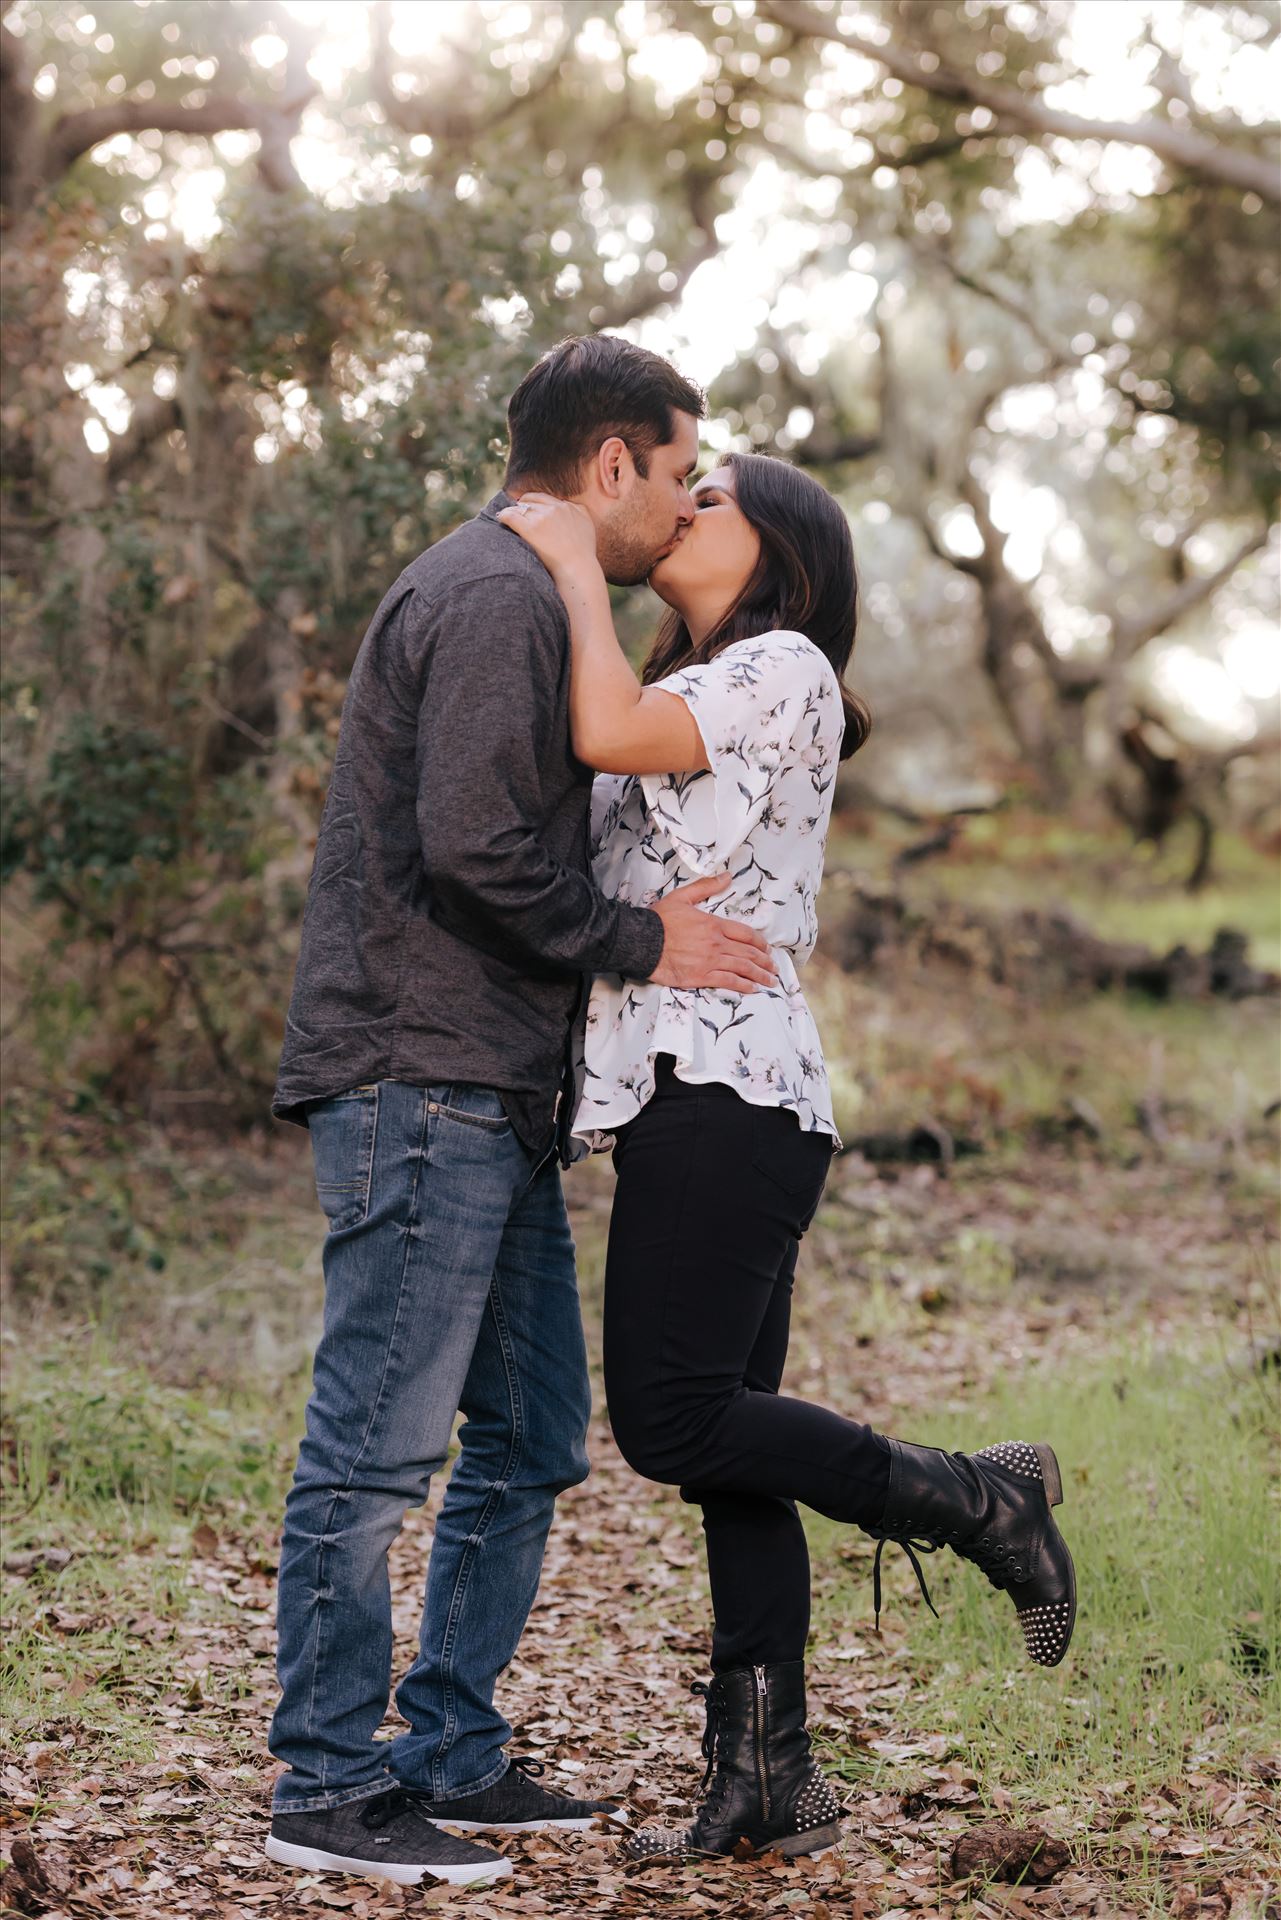 DSC_6450.JPG - Mirror's Edge Photography captures CiCi and Rocky's Sunrise Engagement in Los Osos California at Los Osos Oaks Reserve. The kiss by Sarah Williams